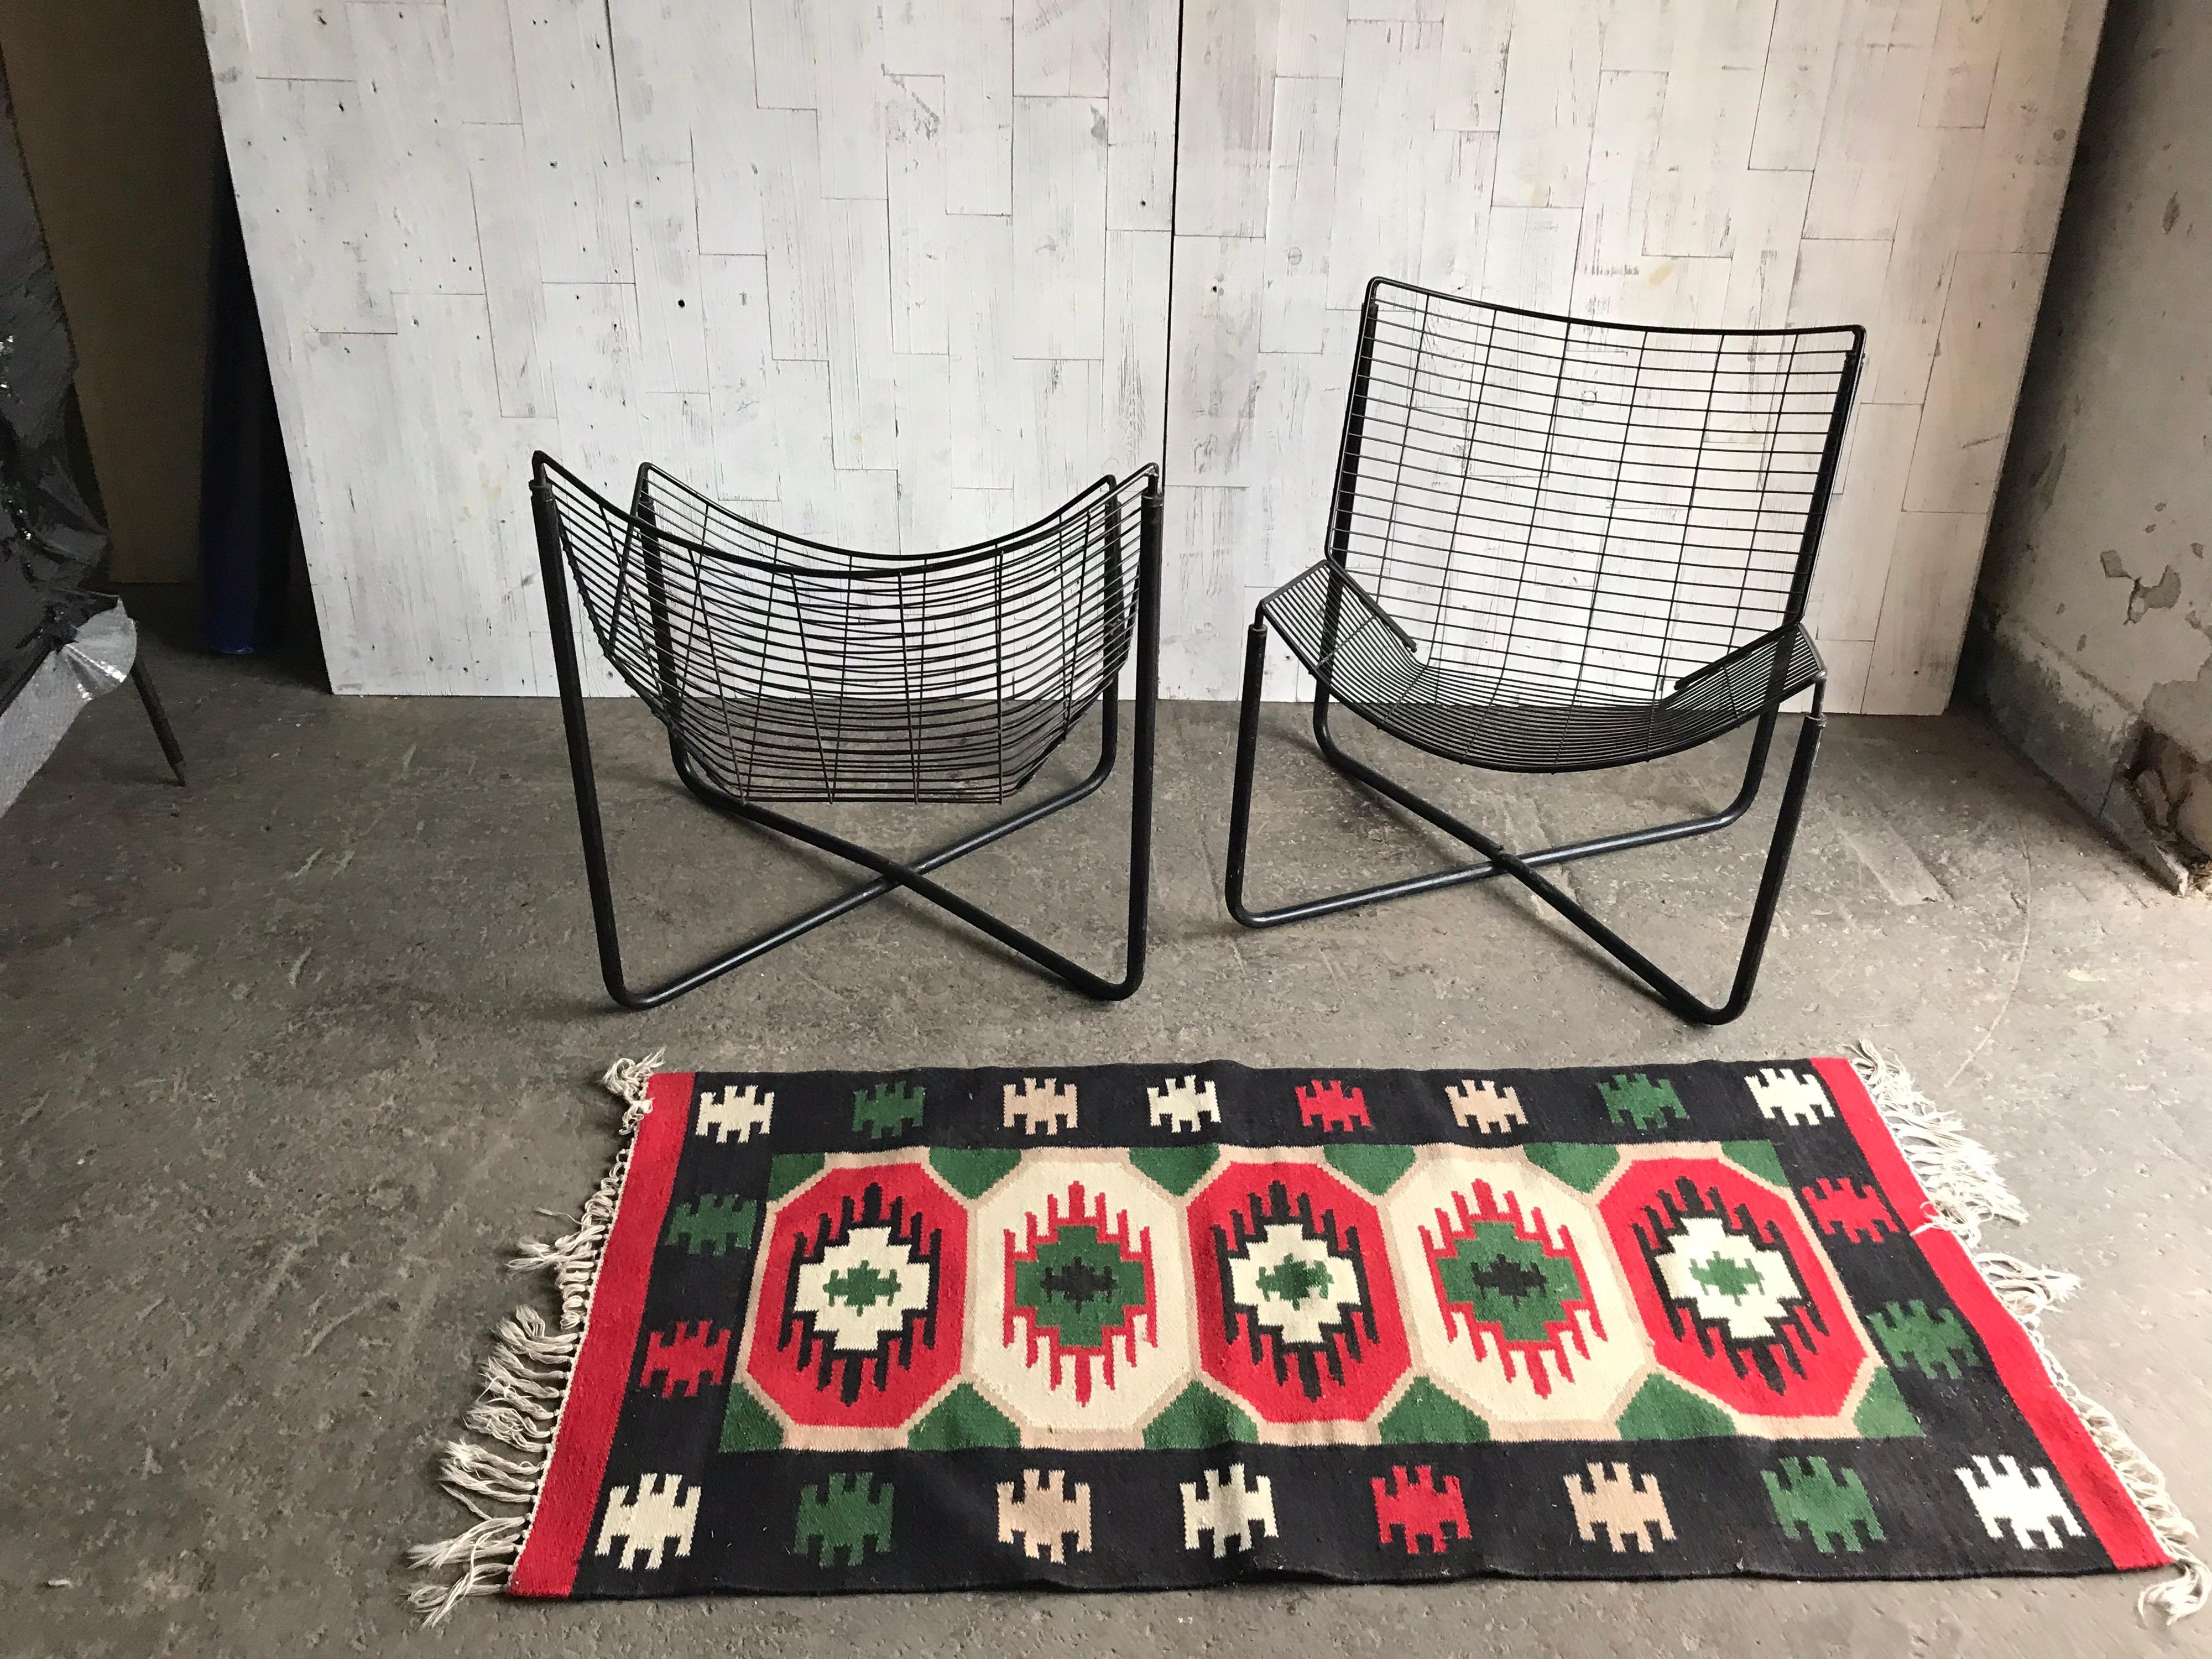 Jarpen lounge chairs by Niels Gammelgaard for IKEA, 1980s, set of 2
designer Niels Gammelgaard
Manufacturer IKEA
Design period 1980-1989
Year of production 1889
Production period 1980-1989
Country of manufacture Sweden
Attribution marks This